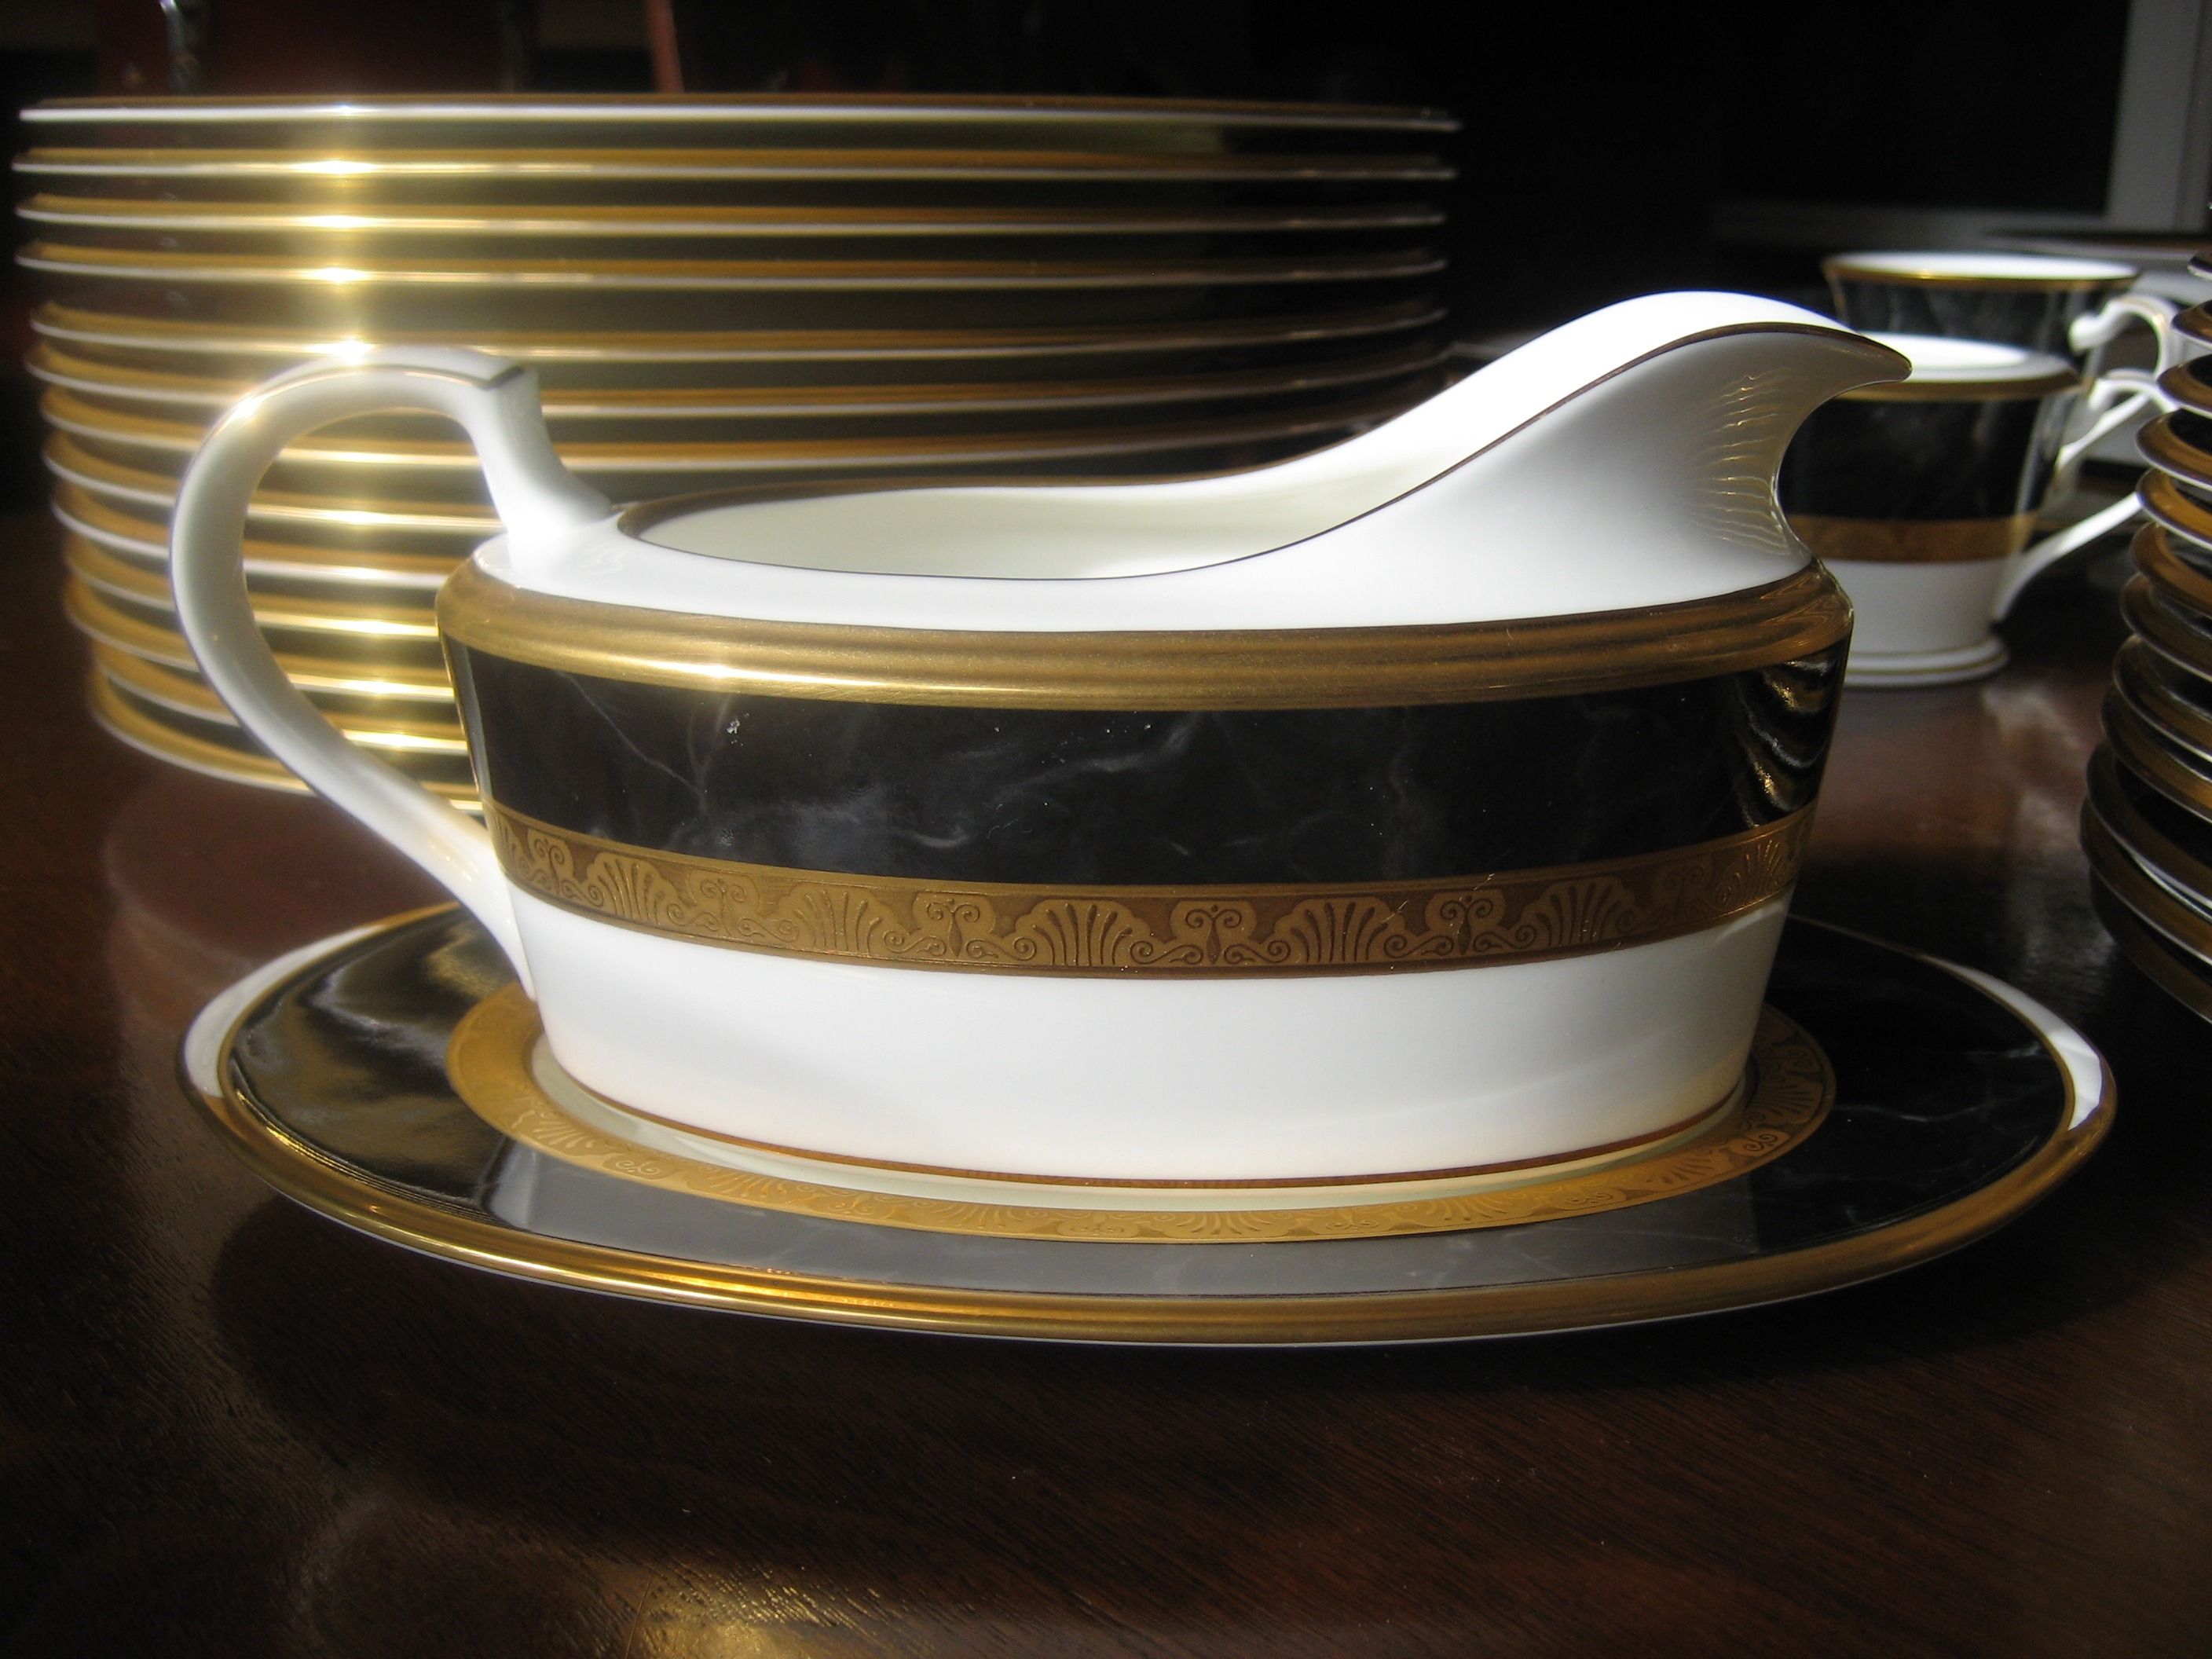 too much stuff i don't need $140 gravy boat